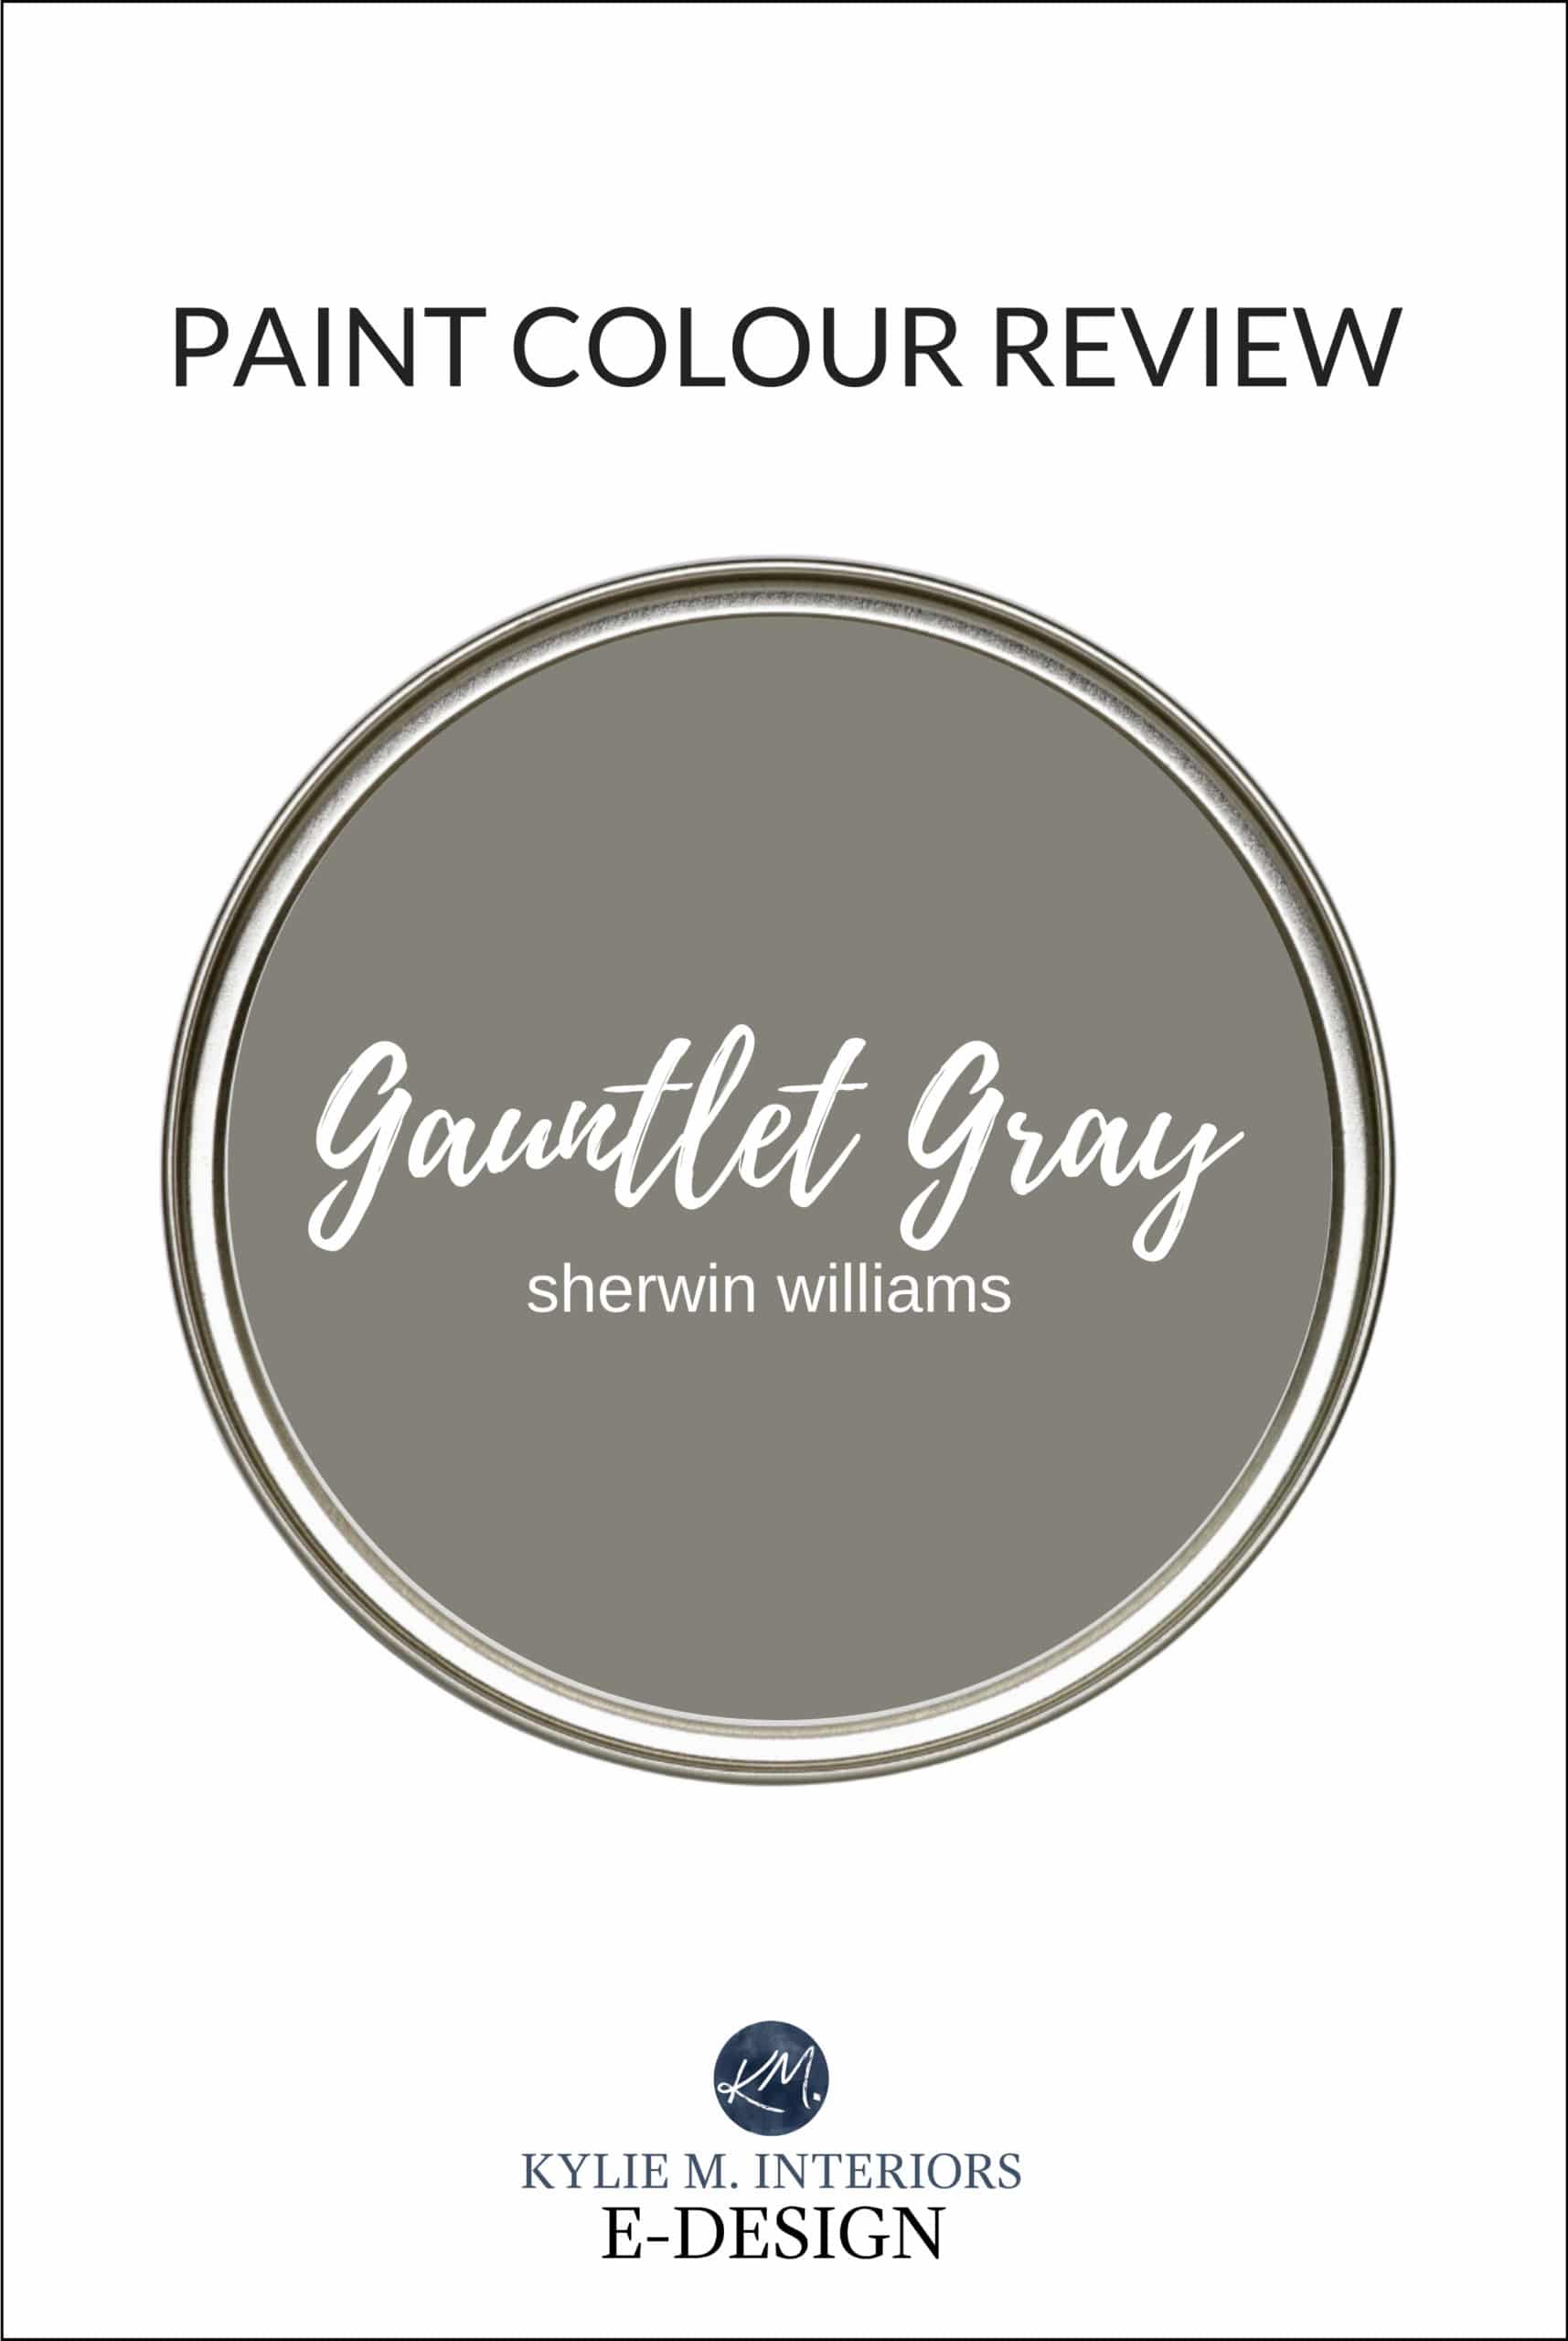 Paint colour review, best dark gray or charcoal paint color, Sherwin Williams Gauntlet Gray. Kylie M Interiors Edesign, virtual or online paint color consulting and diy decorating advice blogger